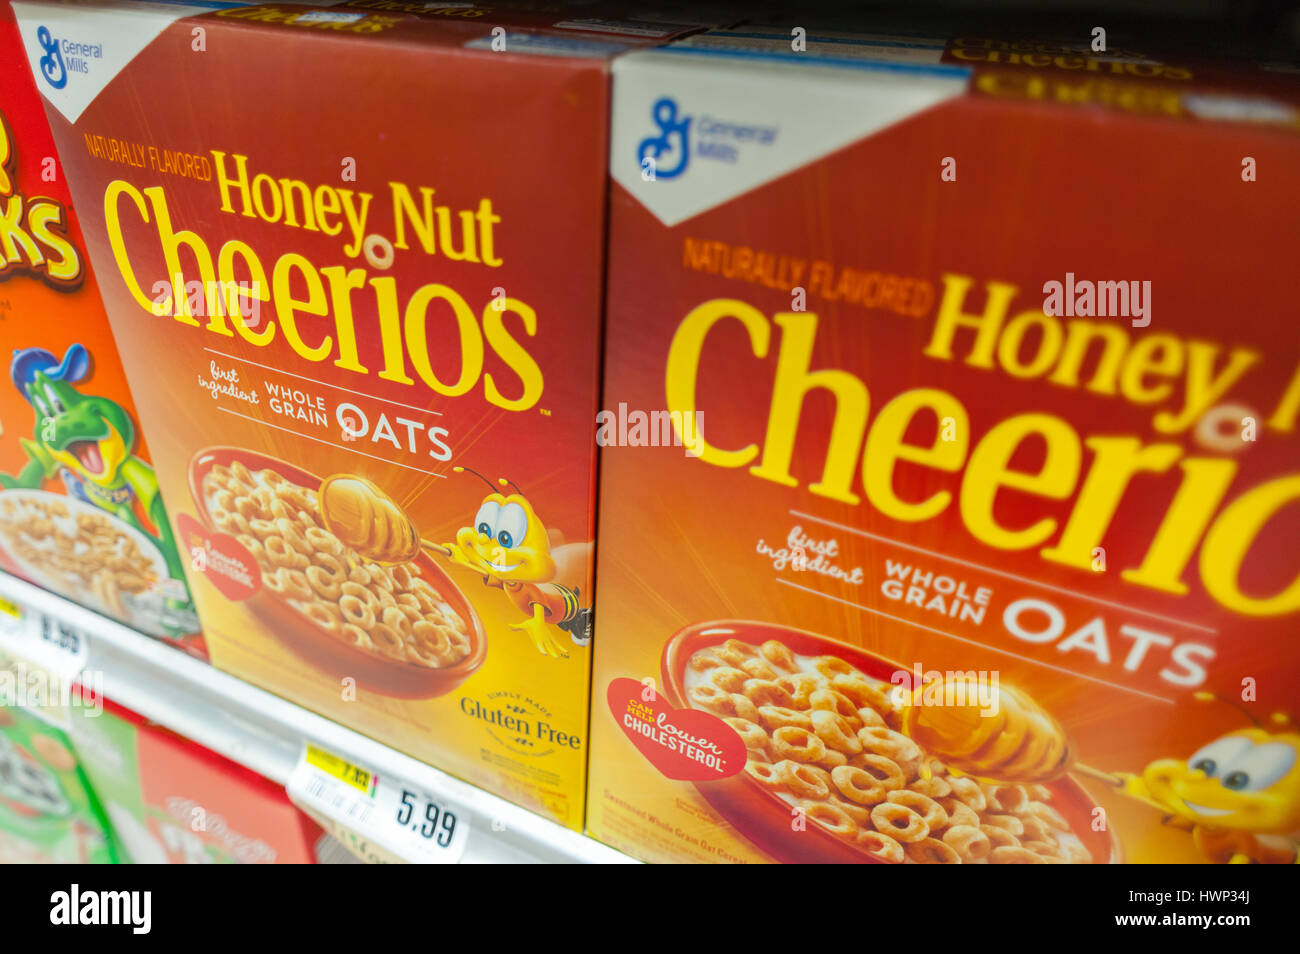 Boxes of General Mills Honey Nut Cheerios breakfast cereals featuring 'Buzz the Bee' in a supermarket in New York on Tuesday, March 21, 2017. General Mills is pulling 'Buzz the Bee' from its packaging to reiase consumer awareness of the declining bee population.  (© Richard B. Levine) Stock Photo